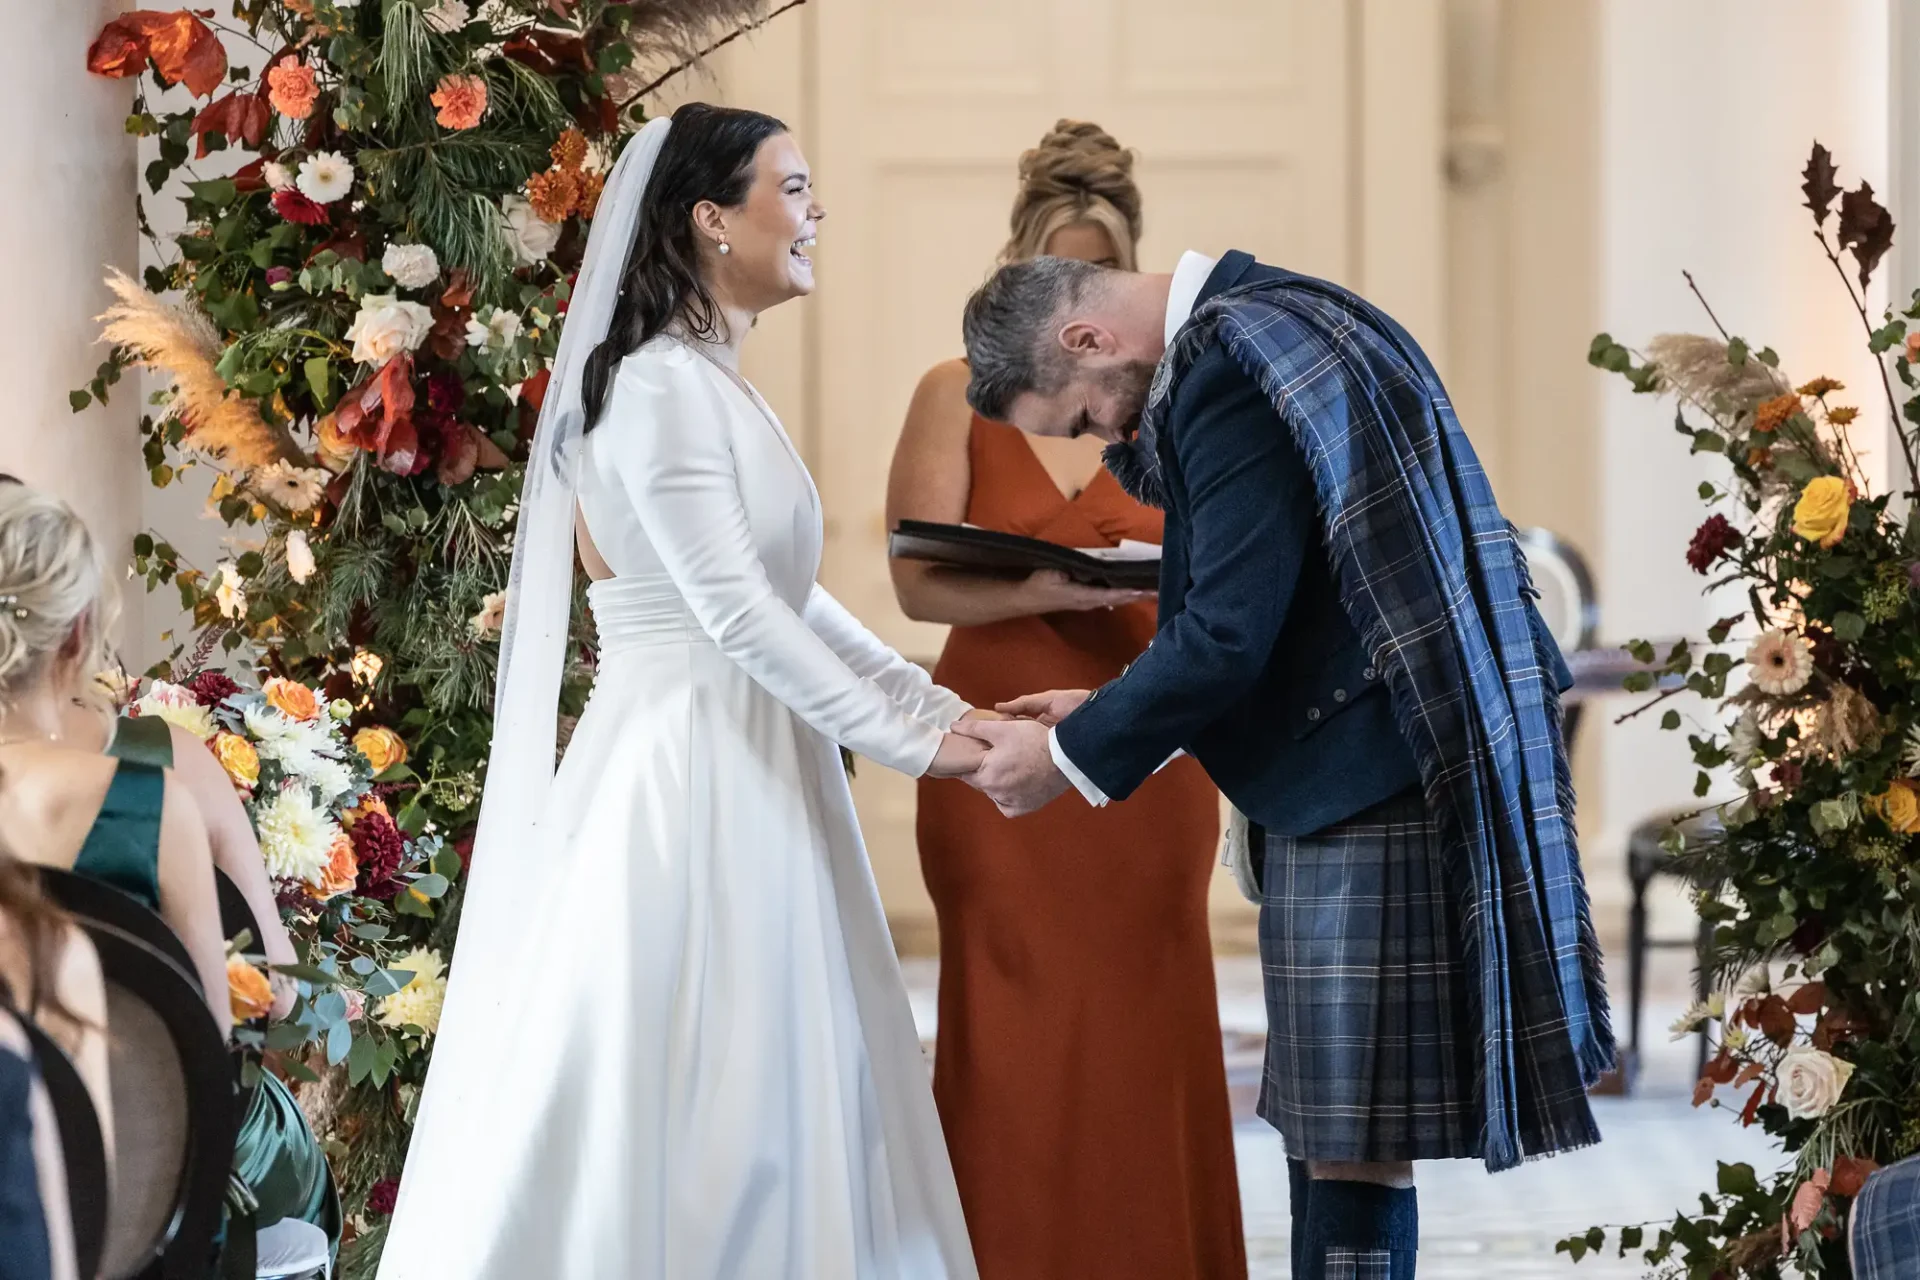 A groom in a kilt bows to a bride in a white dress at a floral-adorned wedding ceremony, with a bridesmaid in orange observing.